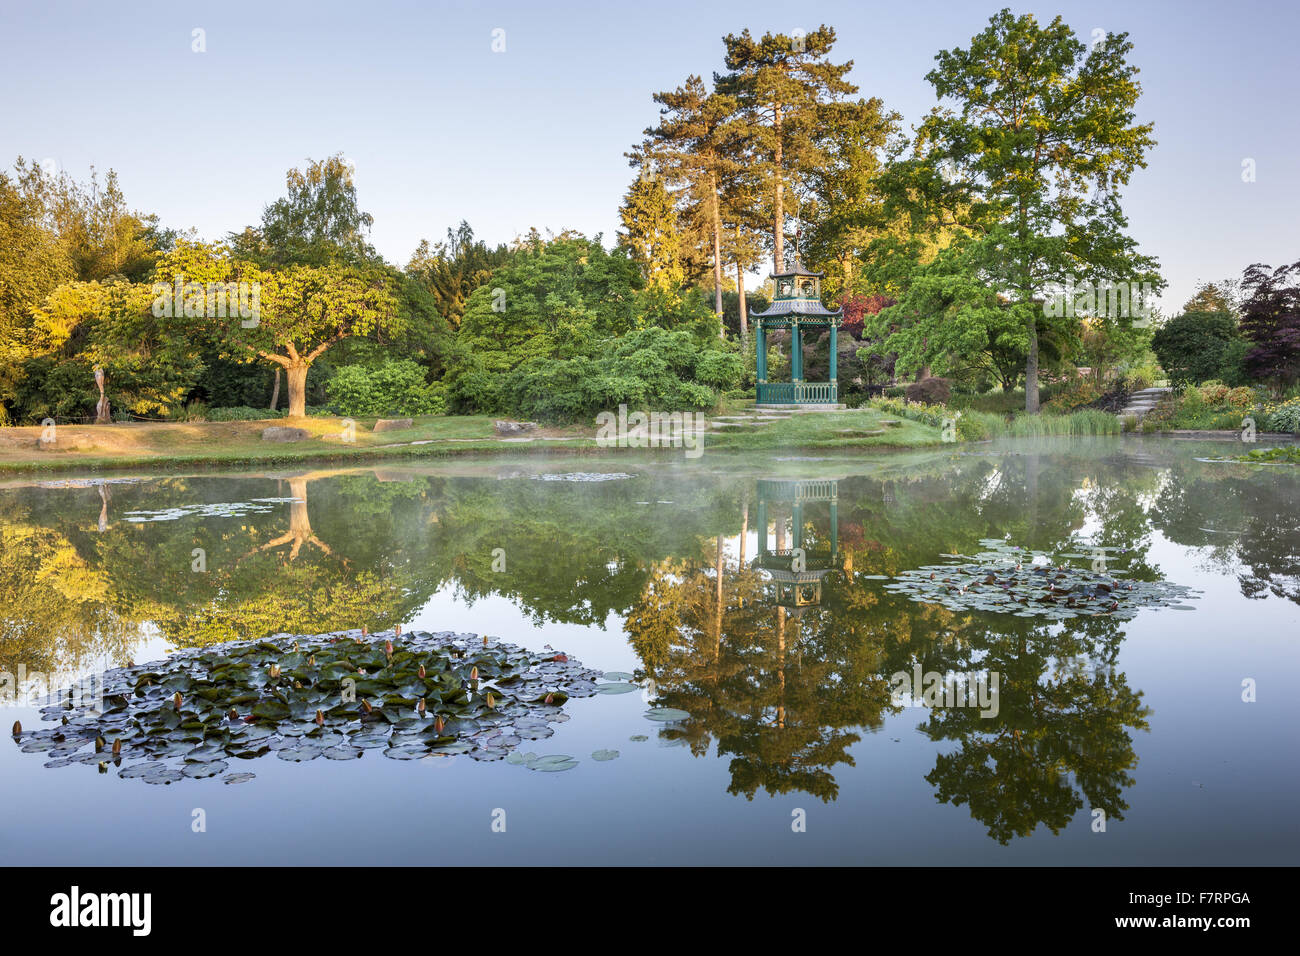 The Japanese pagoda in the Water Garden at Cliveden, Buckinghamshire. Nestled high above the River Thames with panoramic views over the Berkshire countryside, these gardens capture the grandeur of a bygone age. Stock Photo